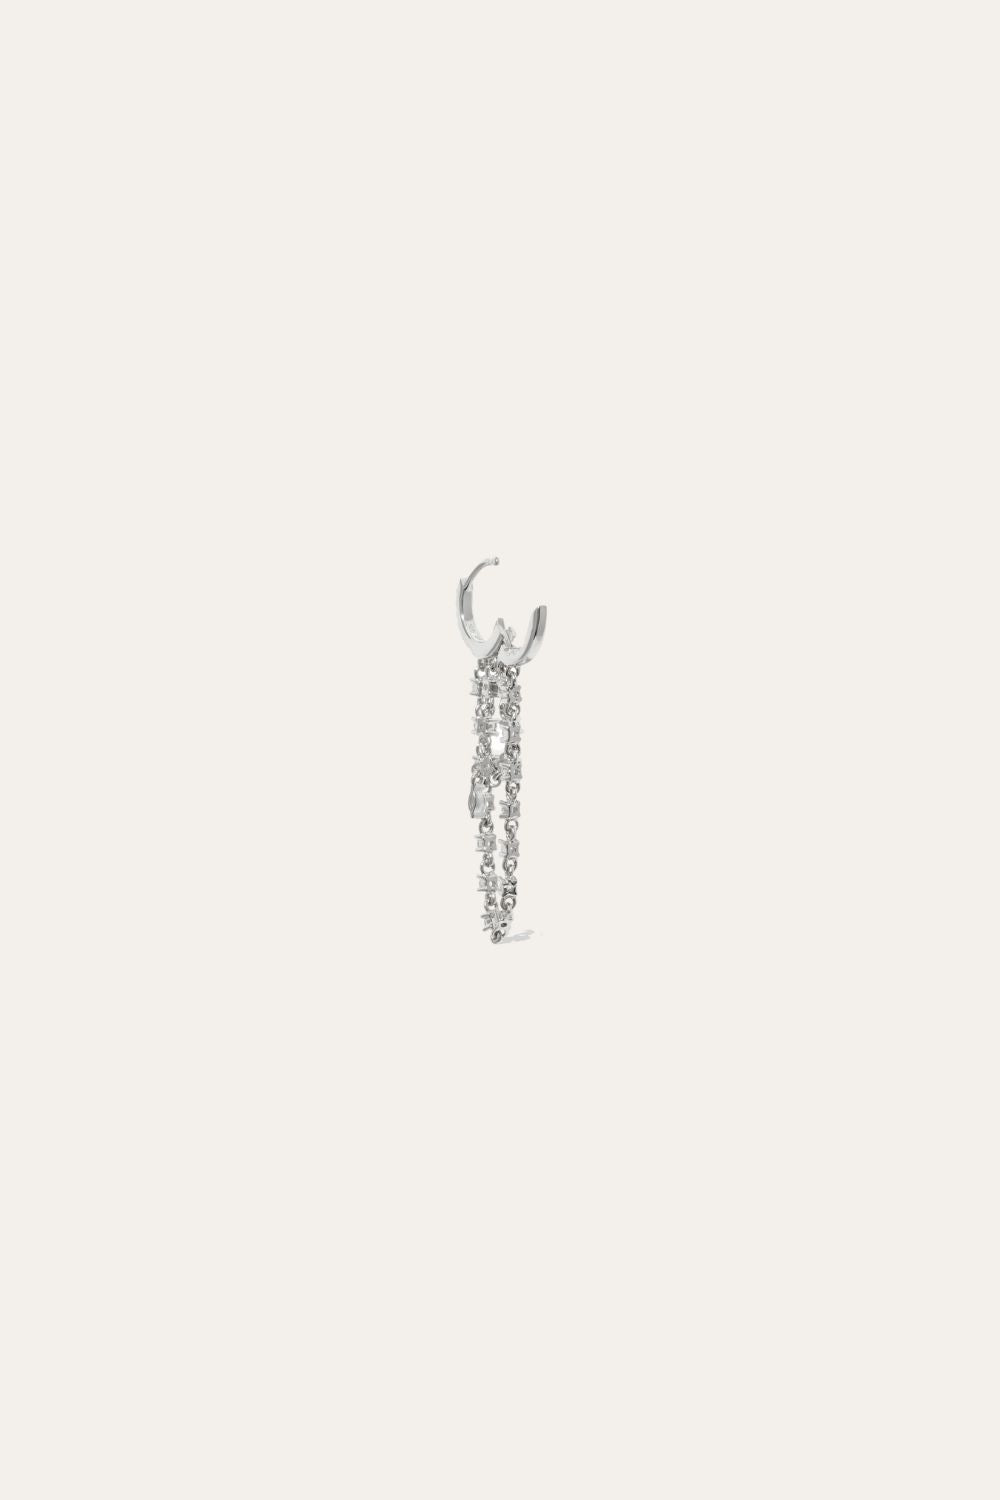 Amina sterling silver earring